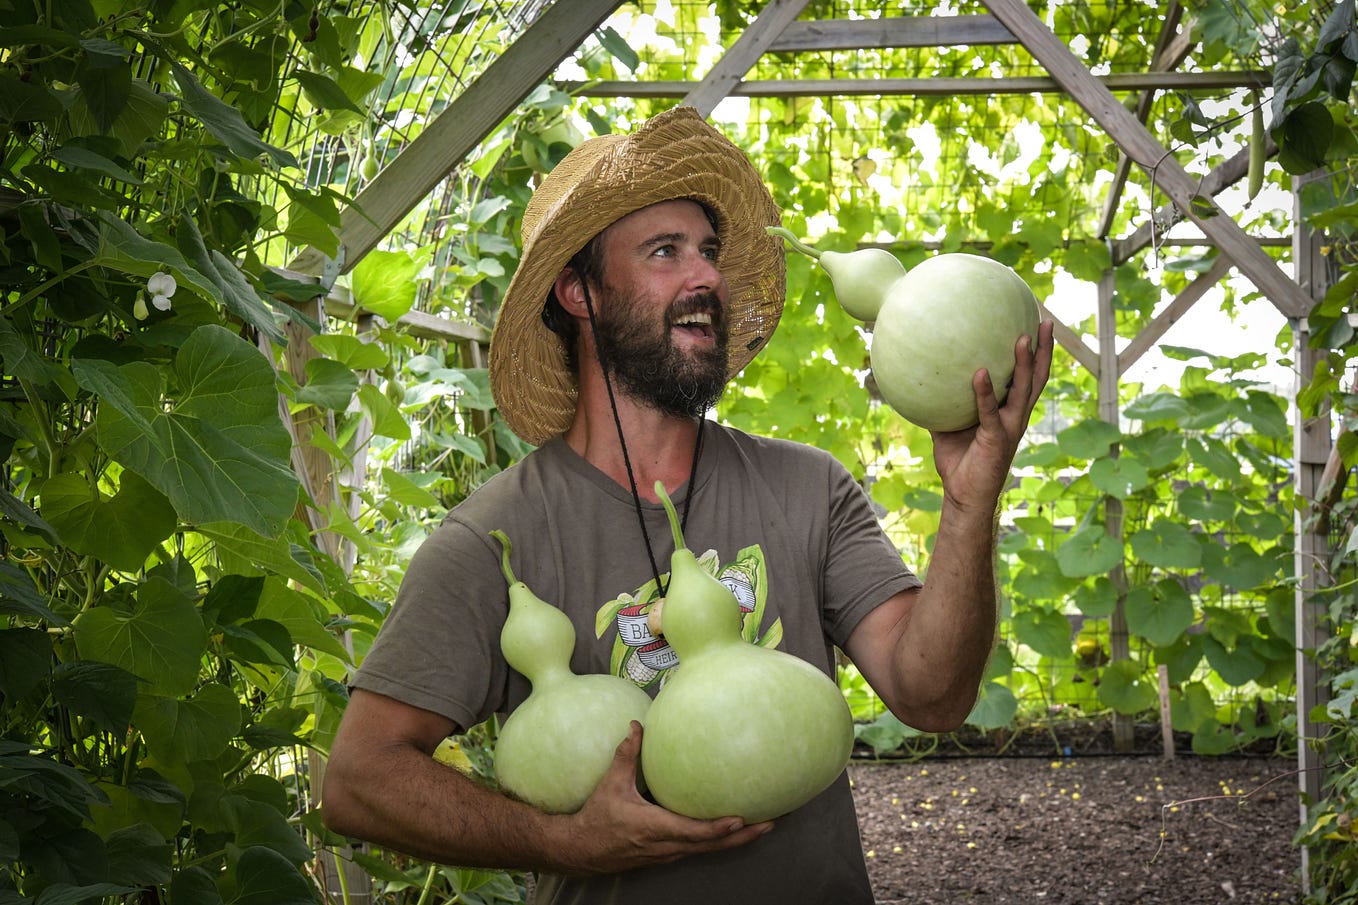 A man in a greenhouse, wearing a straw hat, holds and admires vegetables.